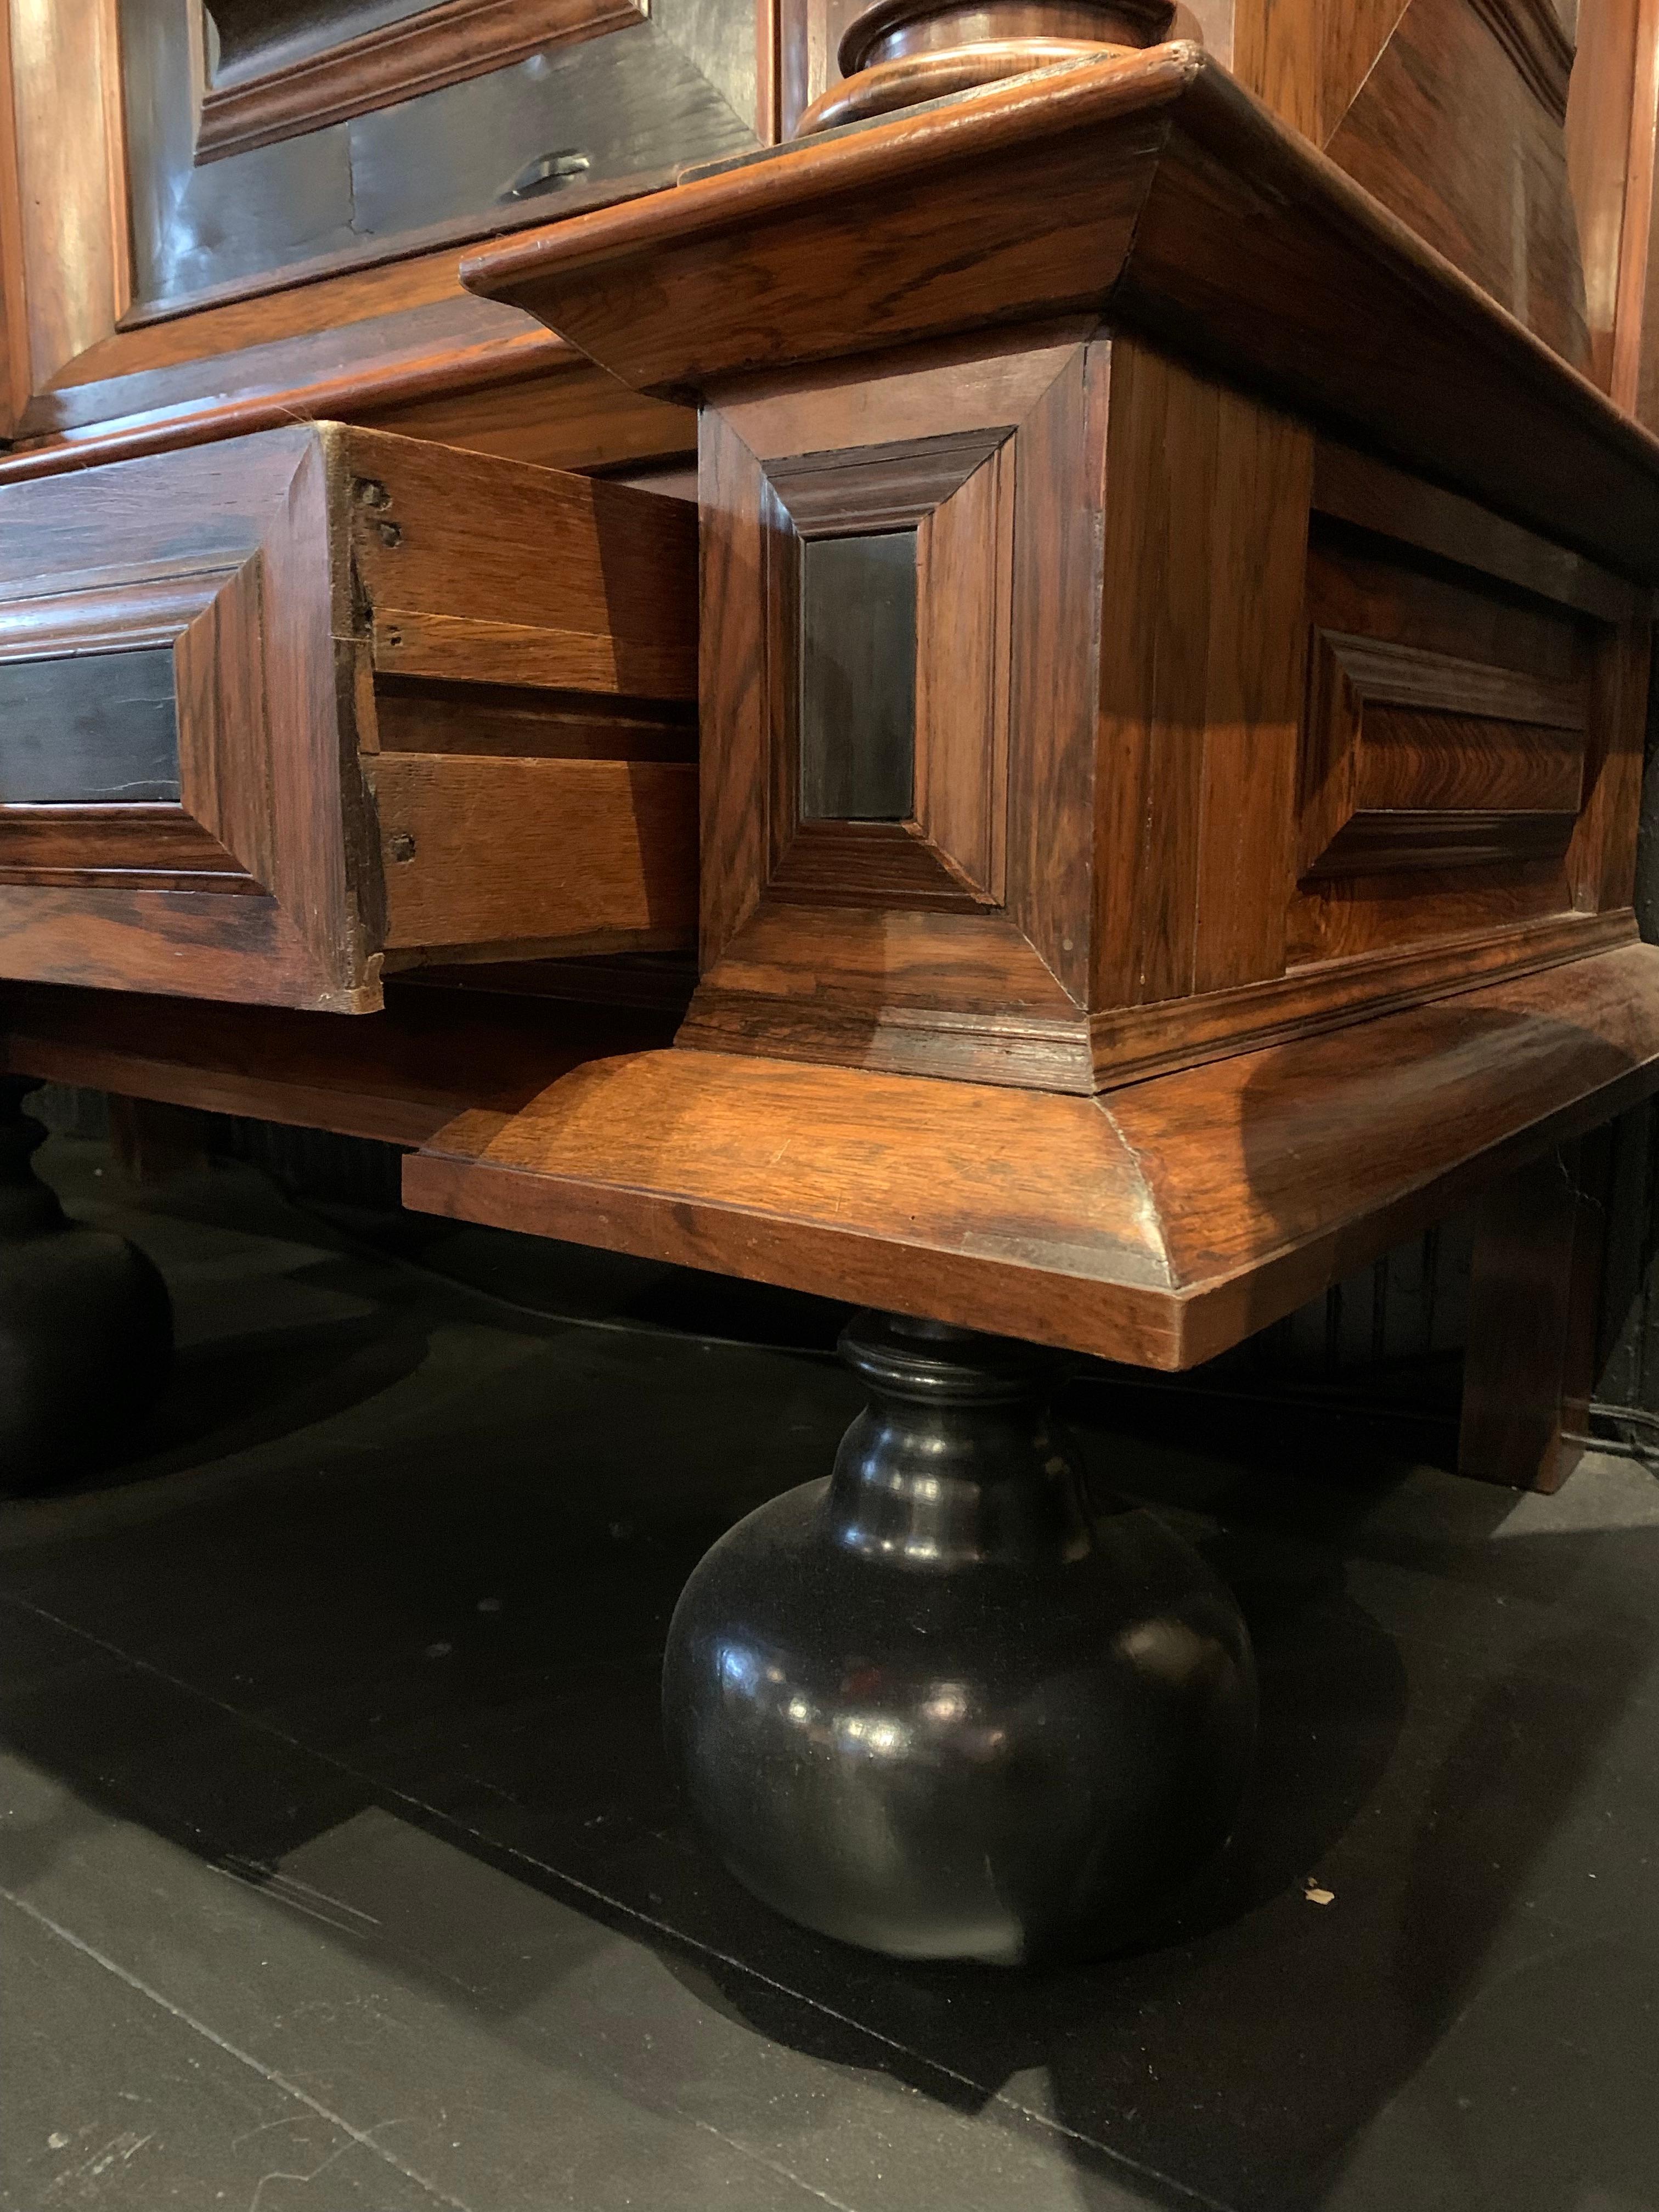 A late 17th century Dutch Kast, made of oak, with ebony and rosewood inlay and veneers sitting on period bun feet. Geometrically carved paneled doors. Hidden drawer with carved lion’s heads and brass ring pulls. Original keys and locking hardware.